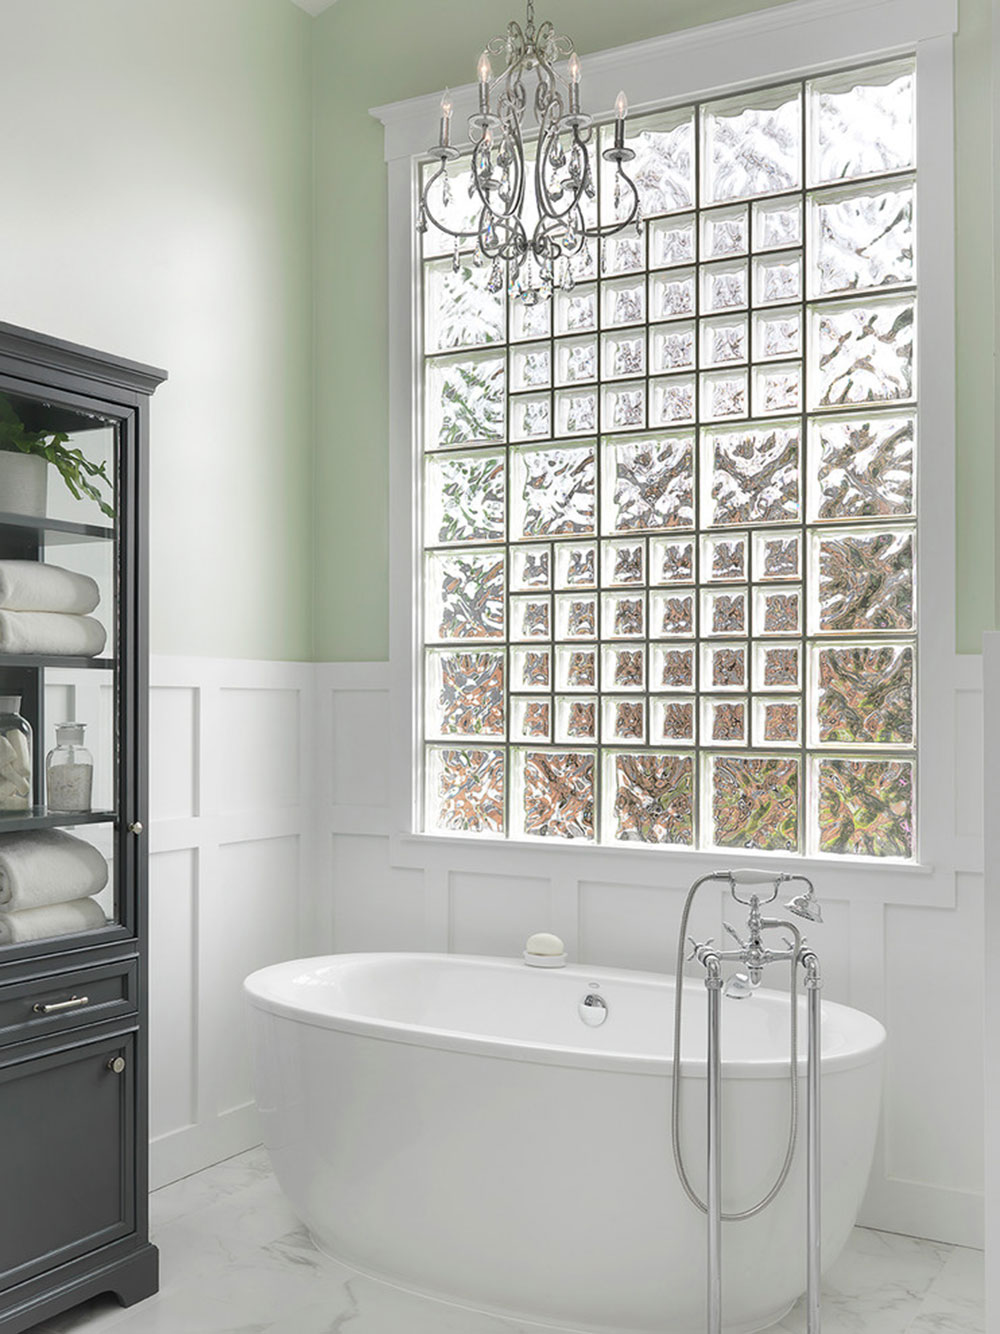 Master-Bath-by-Denise-Fogarty-Interiors Bathroom windows ideas that you can try for your home